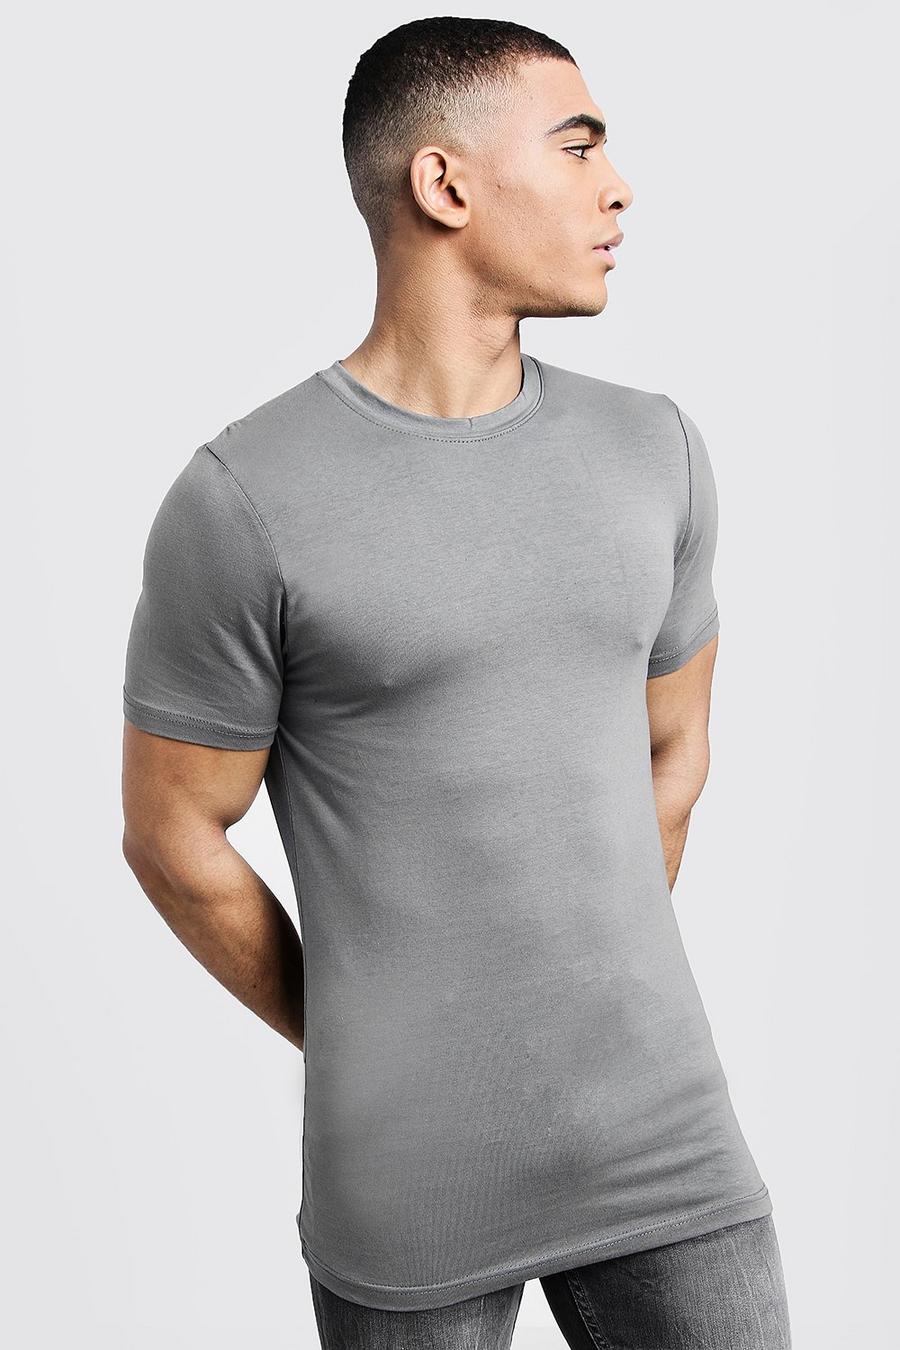 Grey Muscle Fit Crew Neck T Shirt image number 1